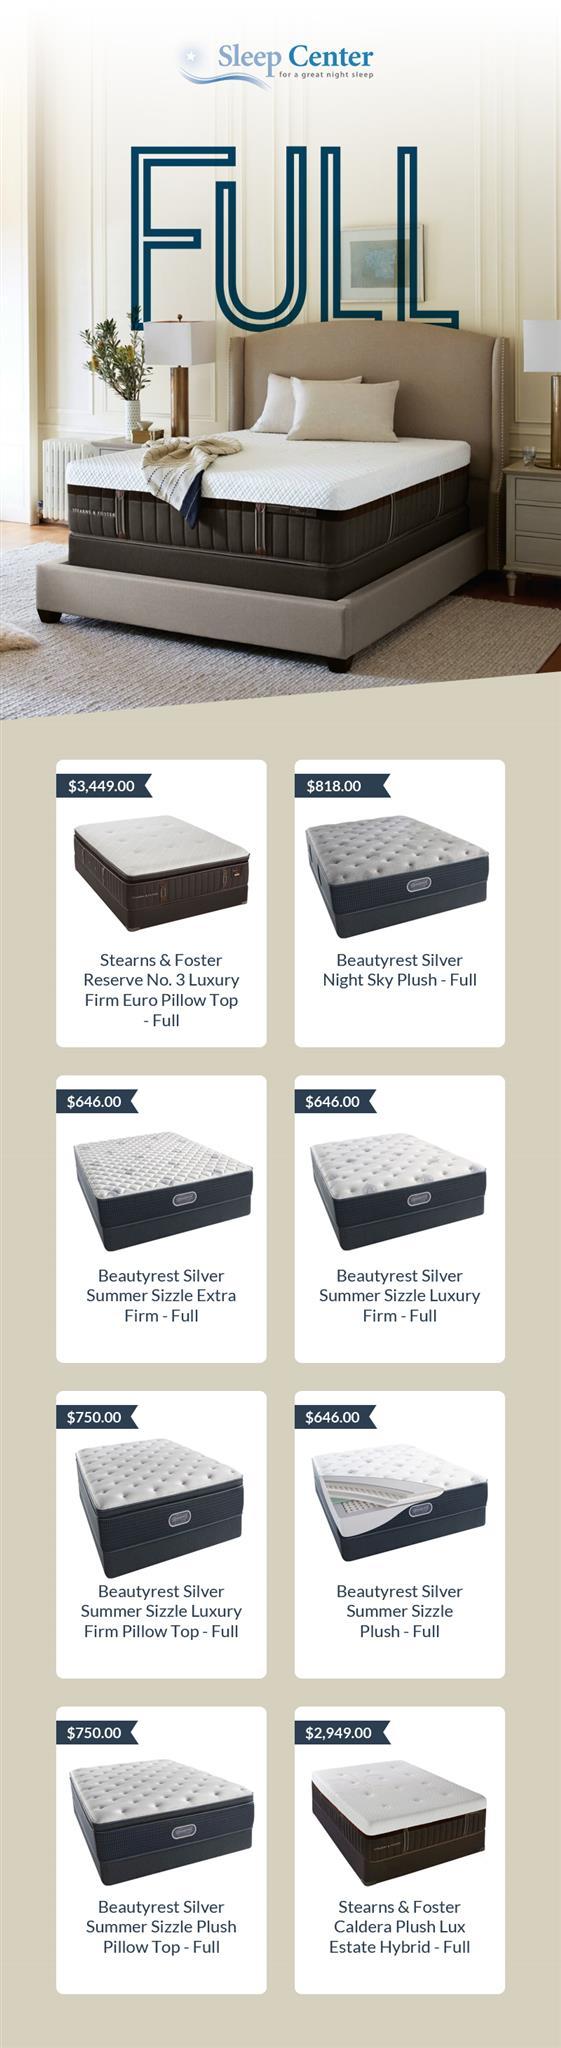 Purchase Quality Full Size Mattresses in Sacramento Online from Sleep Center